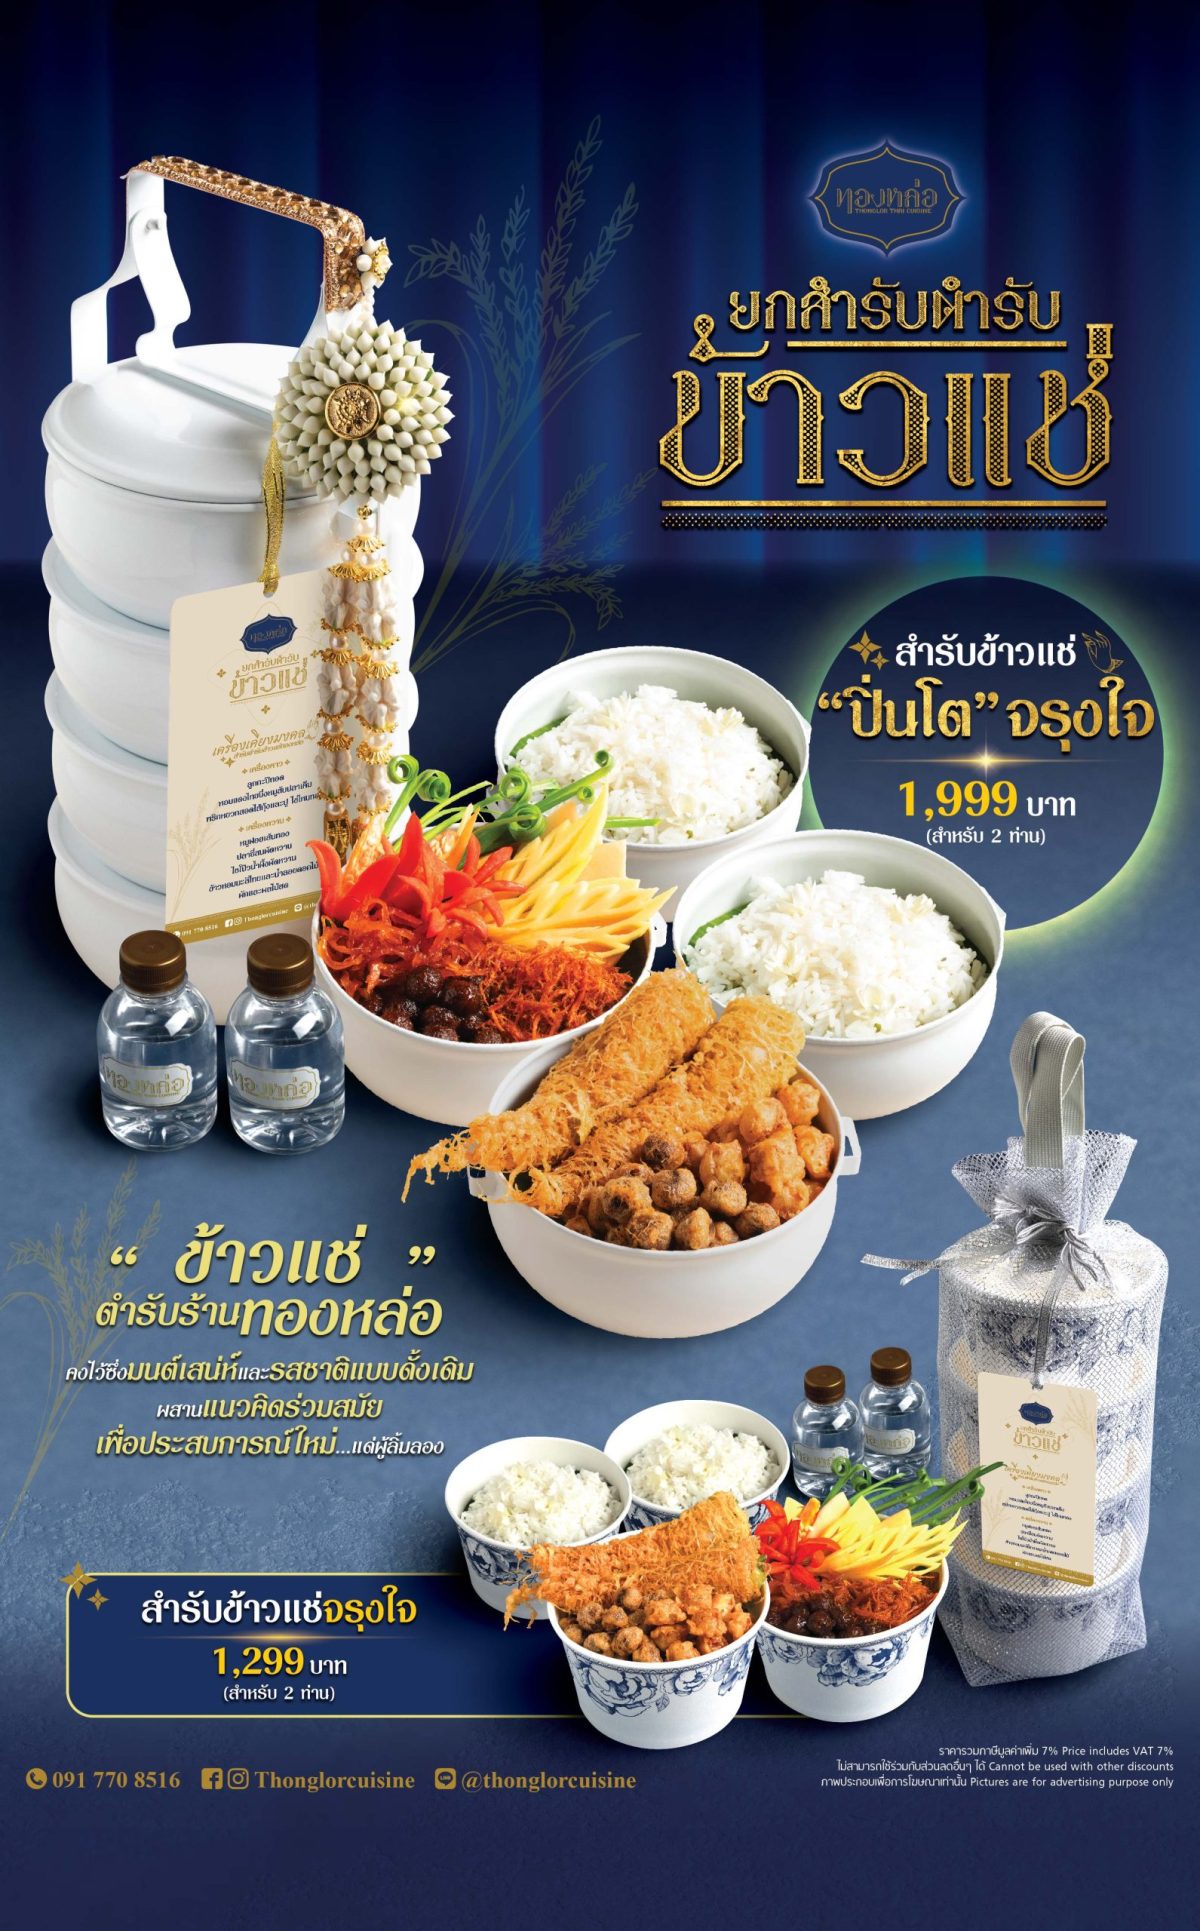 Thonglor Thai Cuisine welcomes summer with refreshing Khao Chae (chilled rice in jasmine-scent water), now available to pre-order for